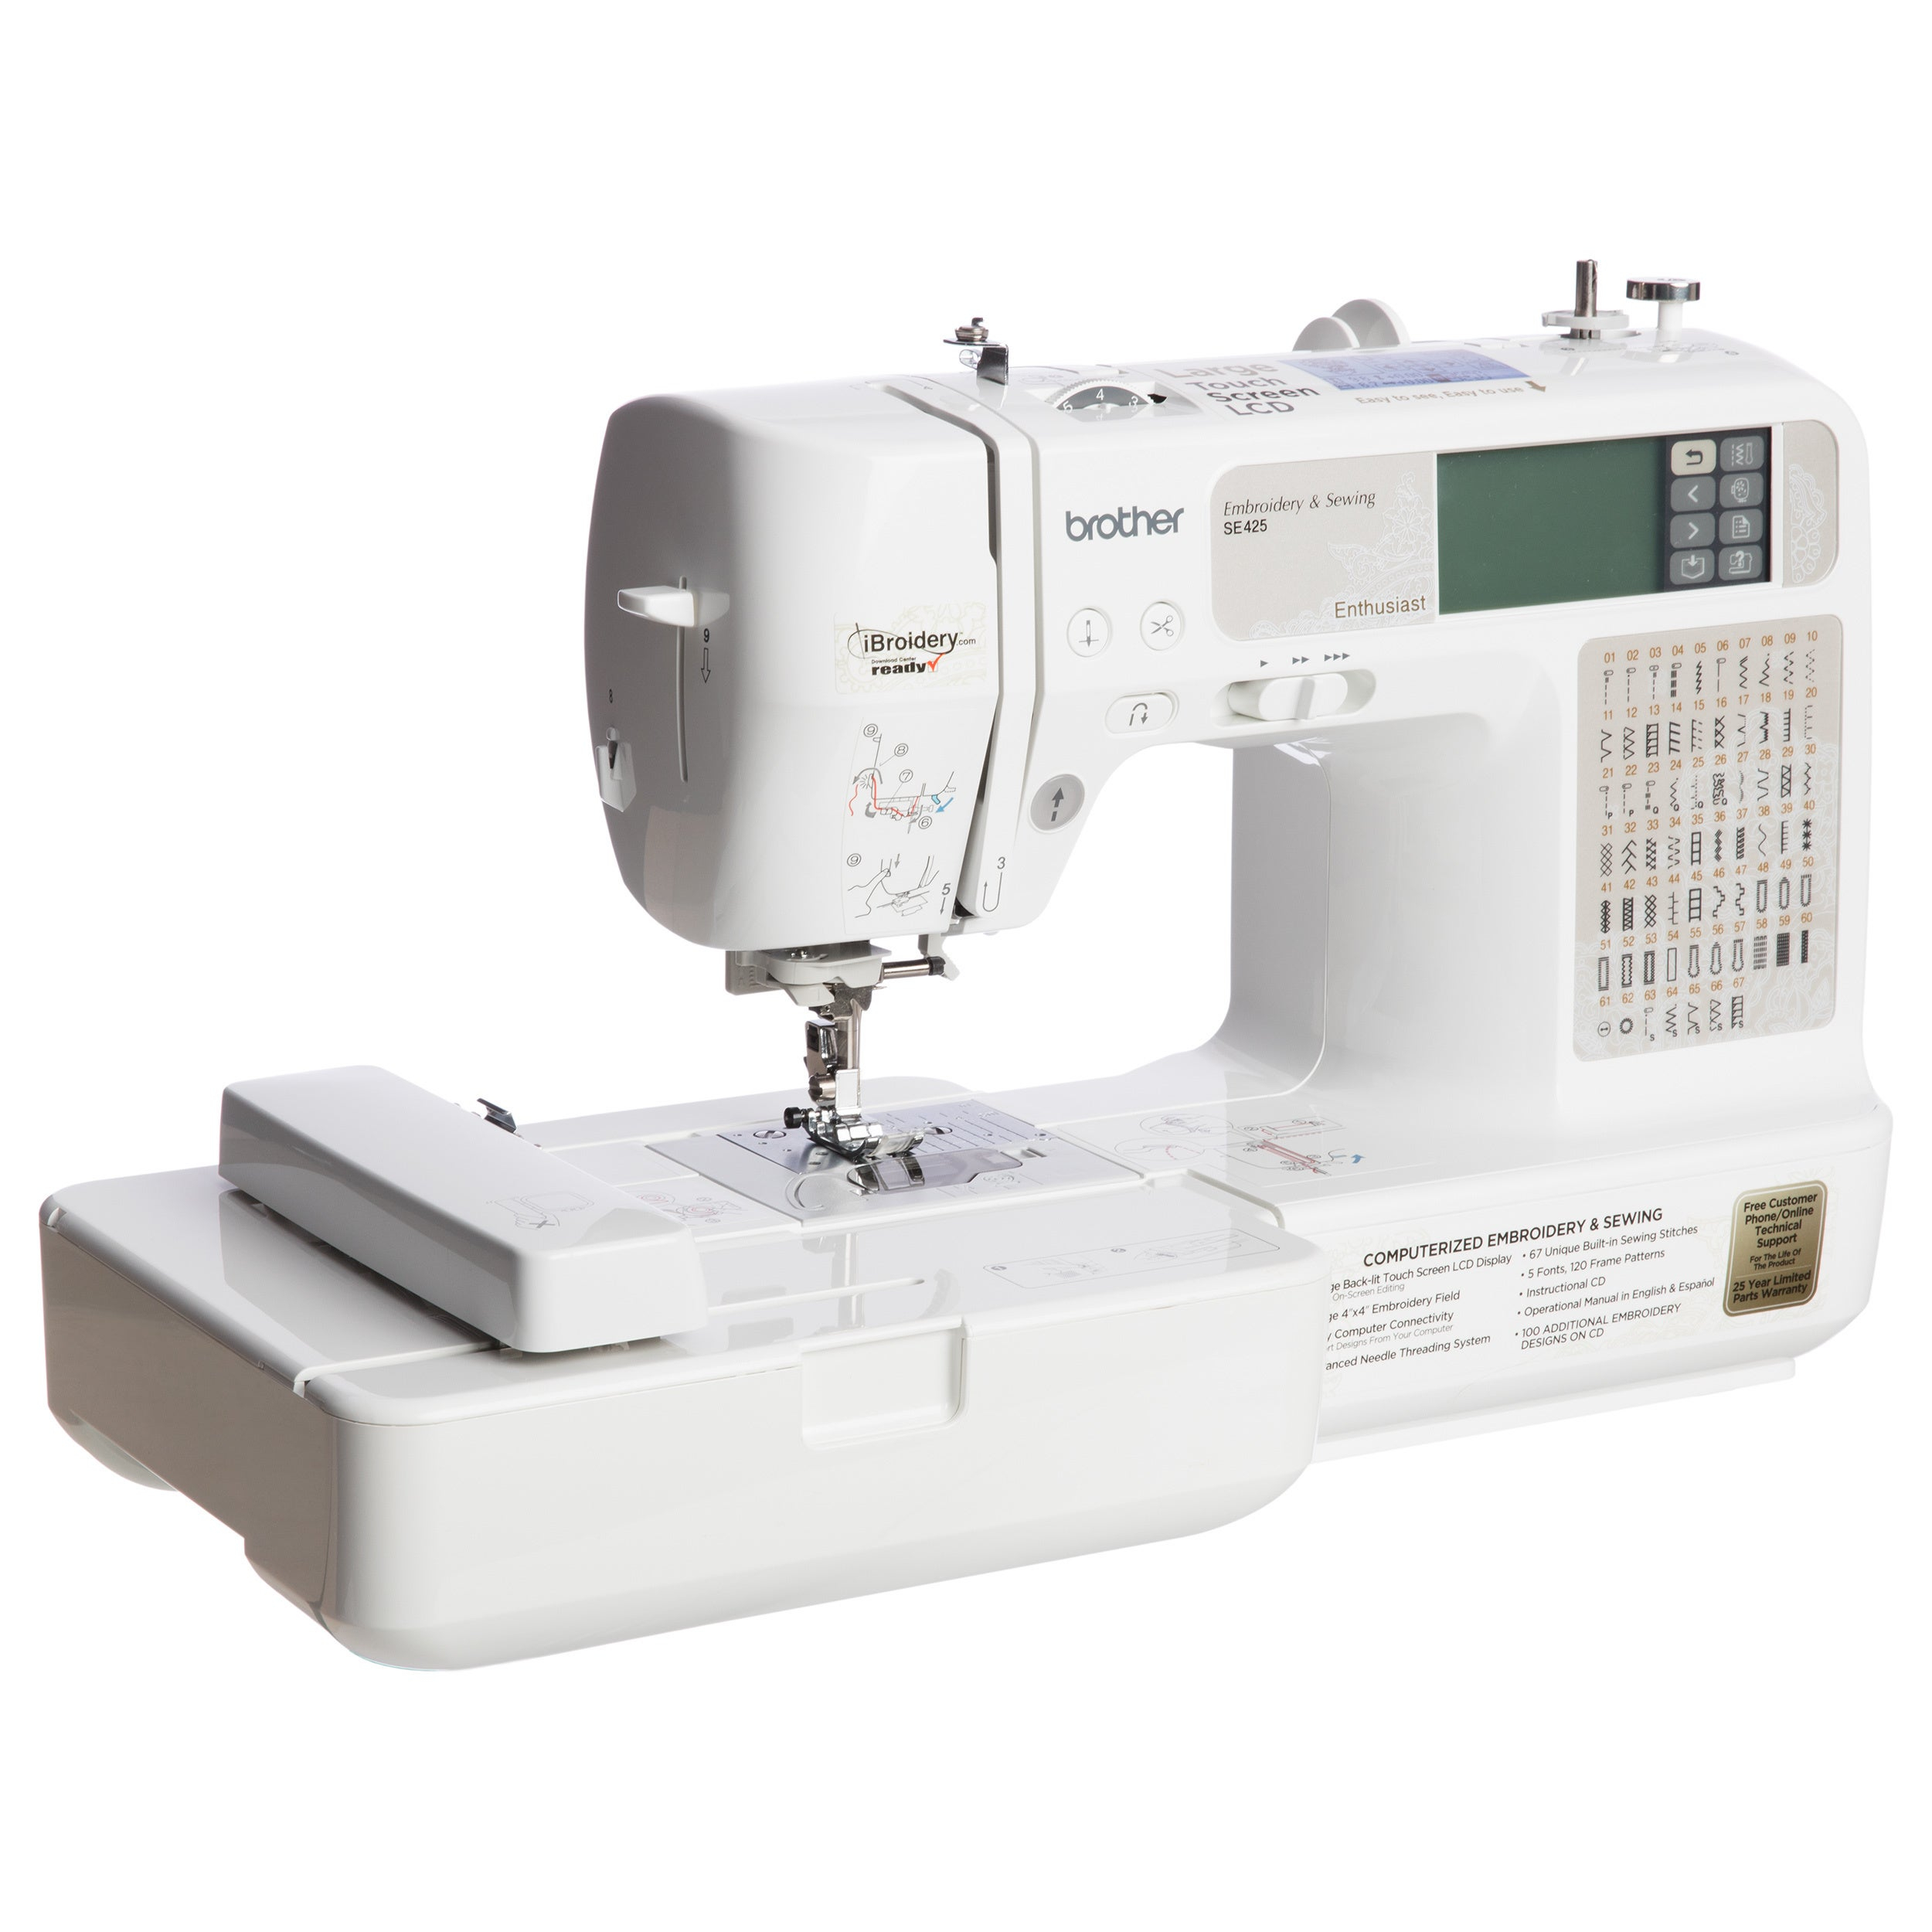 Brother Embroidery Patterns Free Brother Se425 Computerized Sewing And Embroidery Machine Factory Refurbished